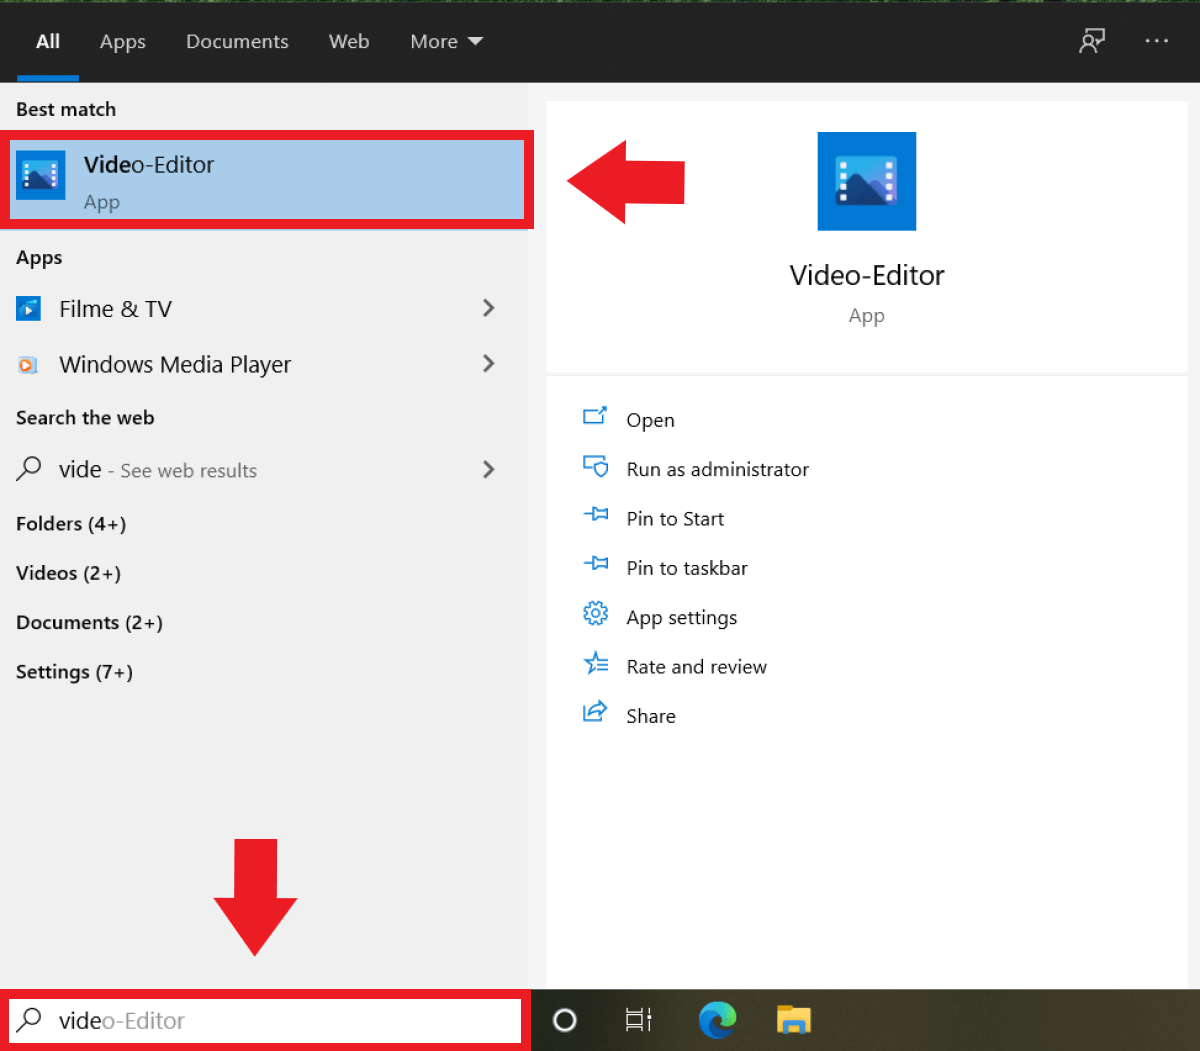 Enter “Video Editor” in the Windows search bar